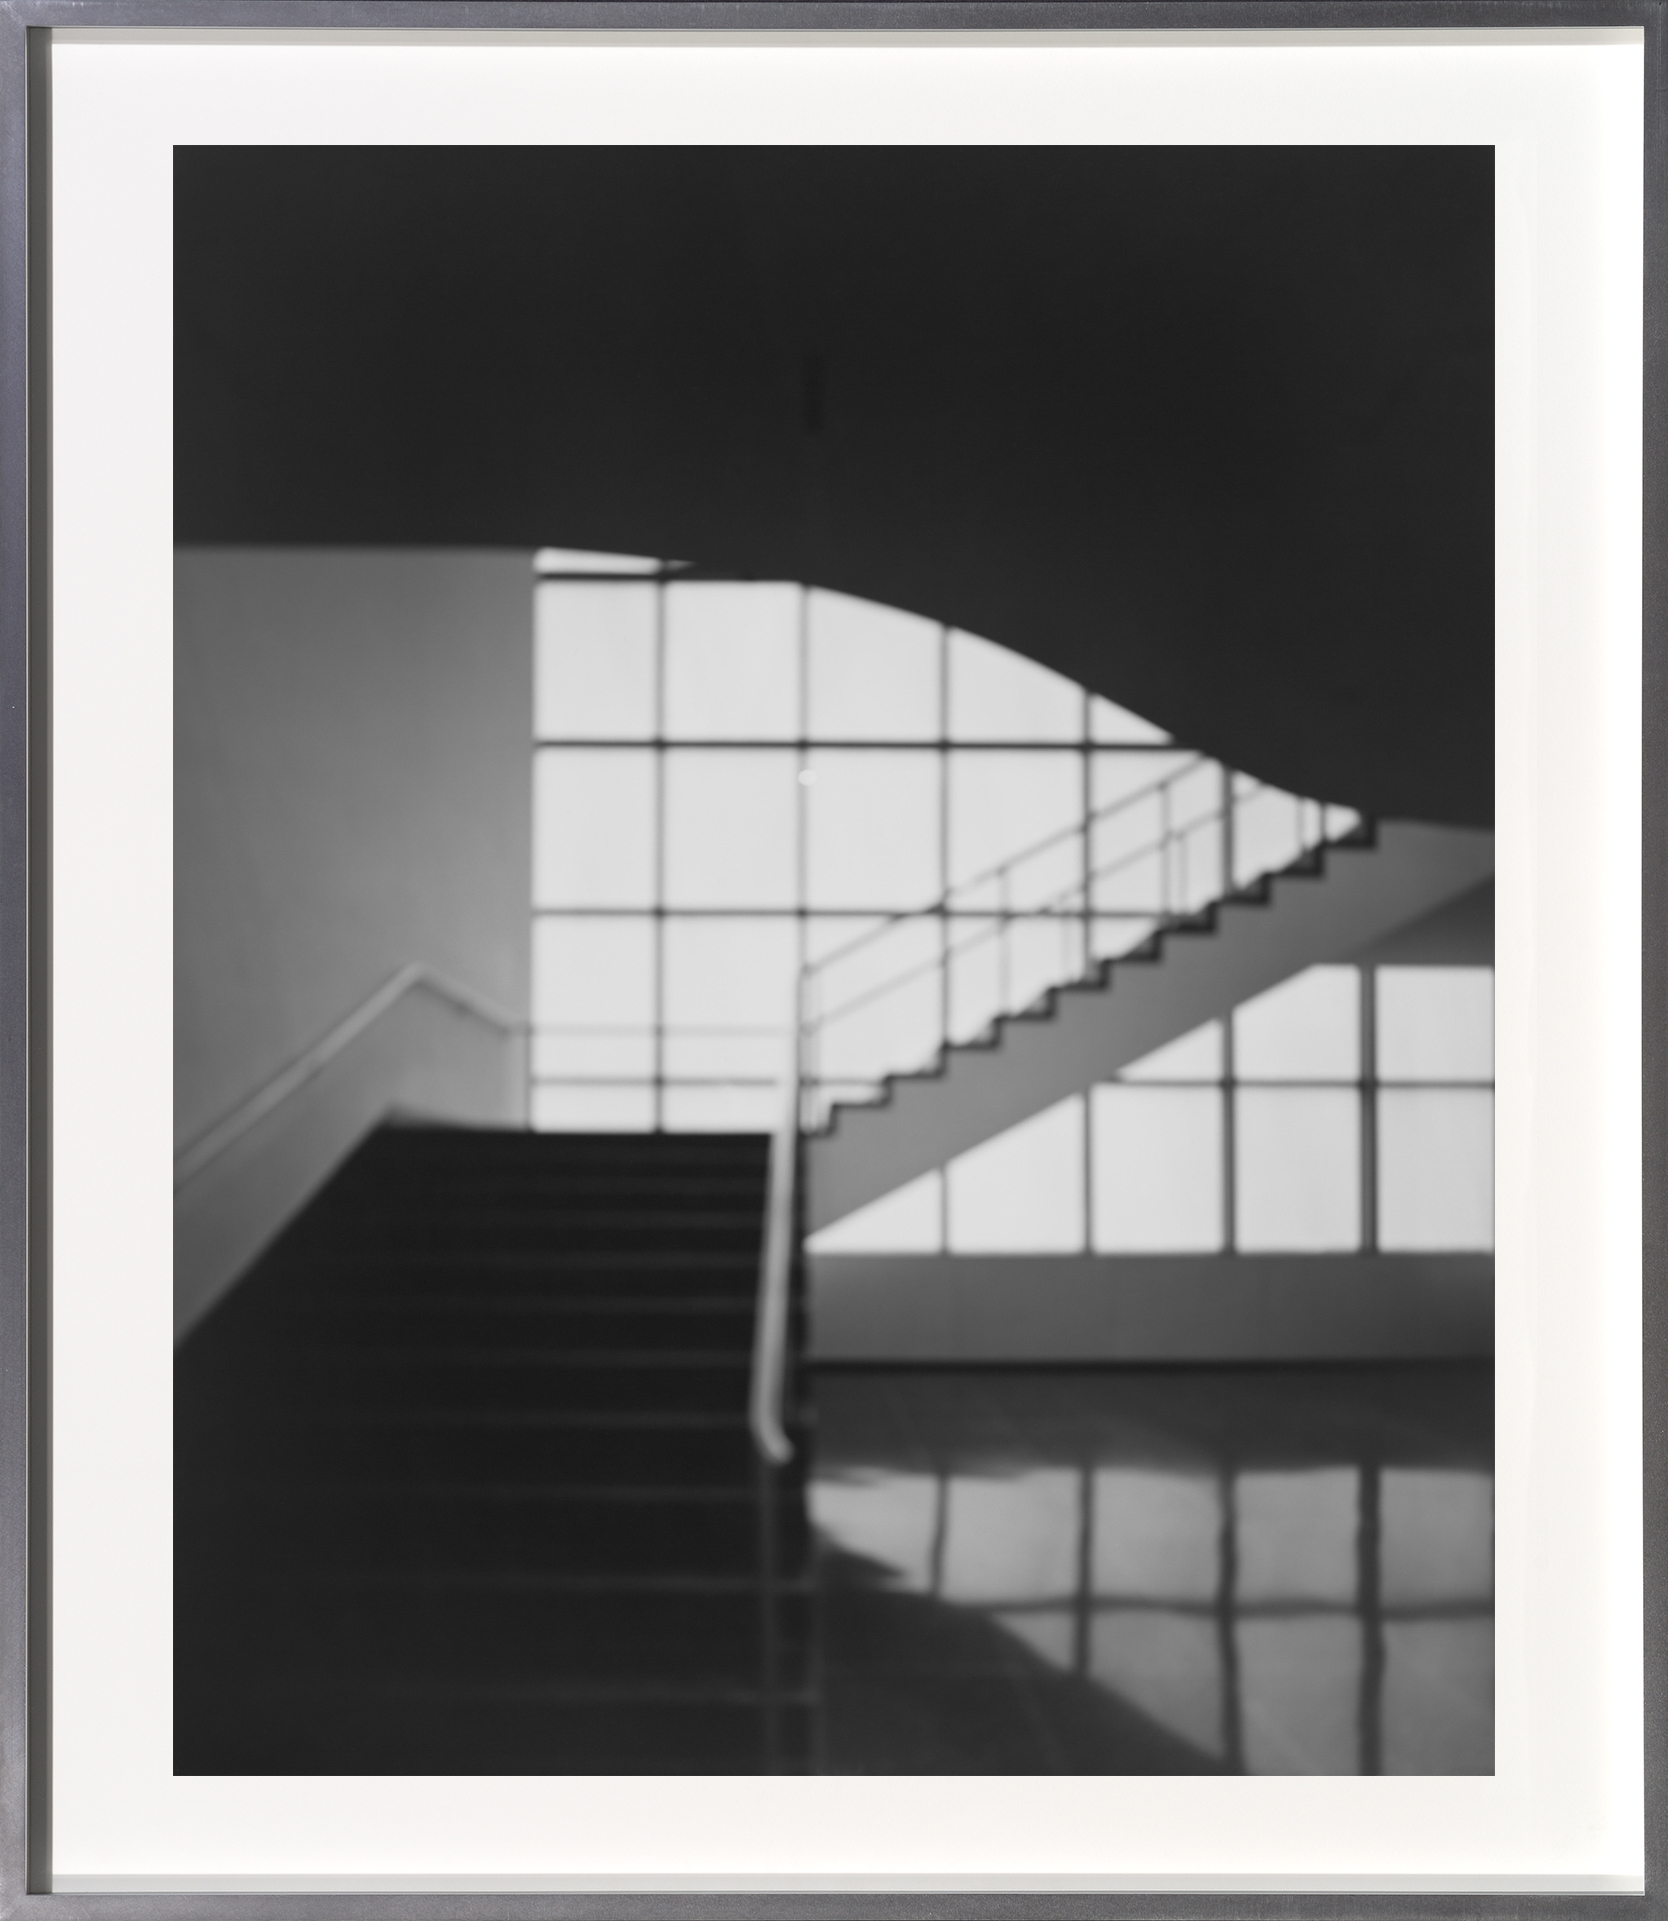 A framed black and white photograph depicting a blurry stairwell and window